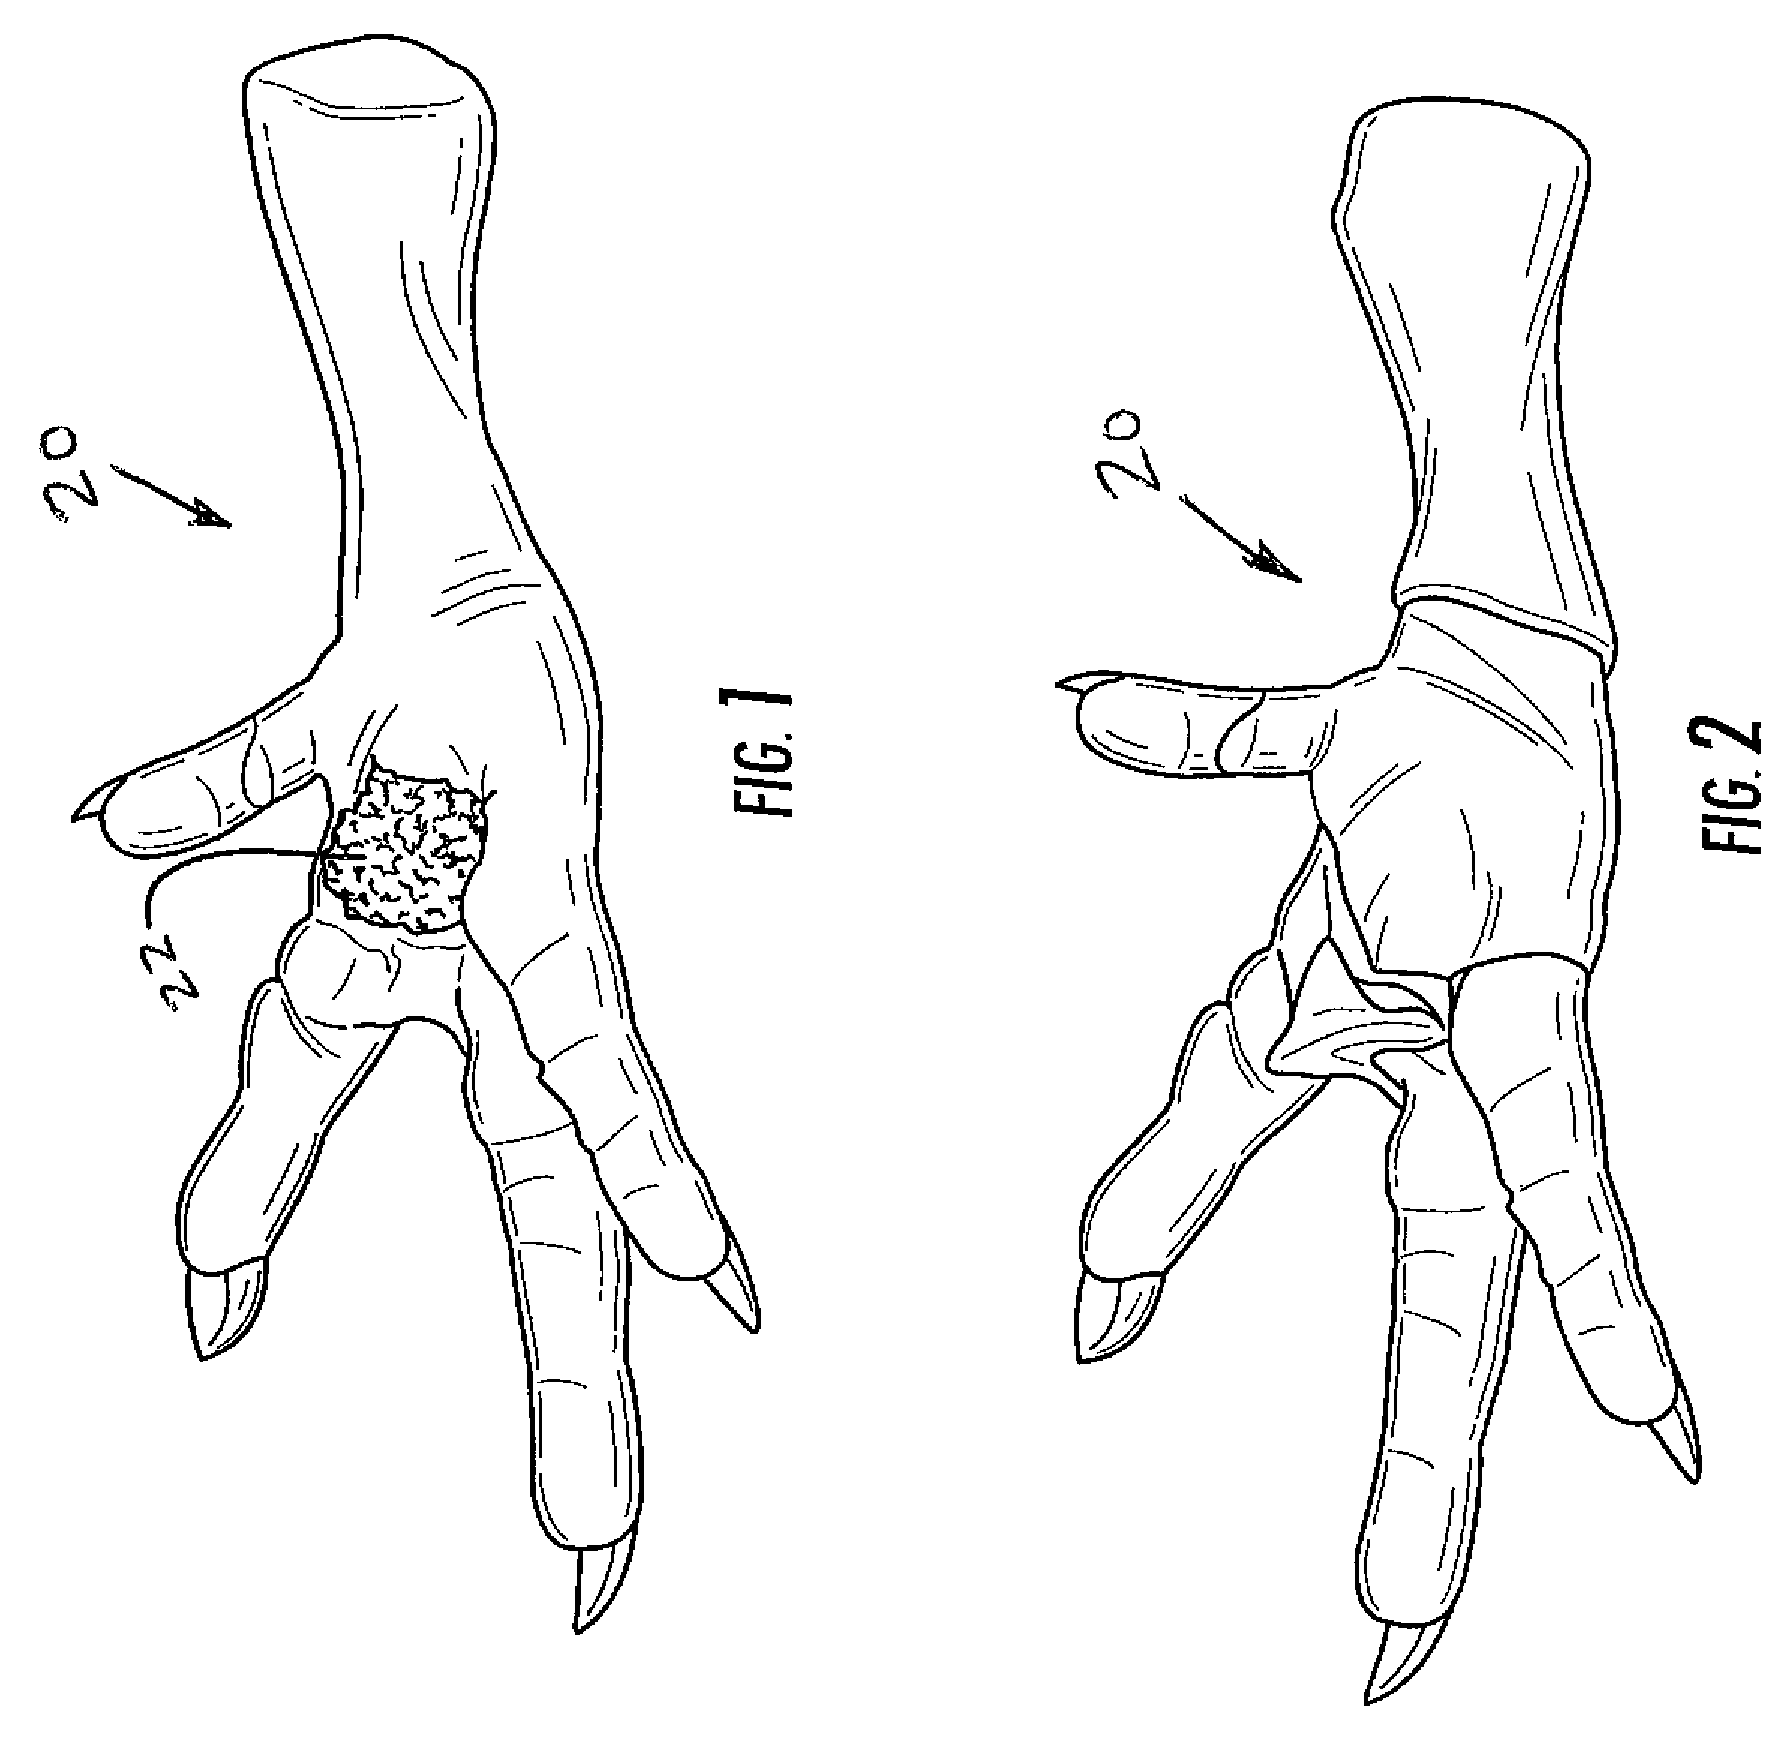 Device for removing material from feet of poultry